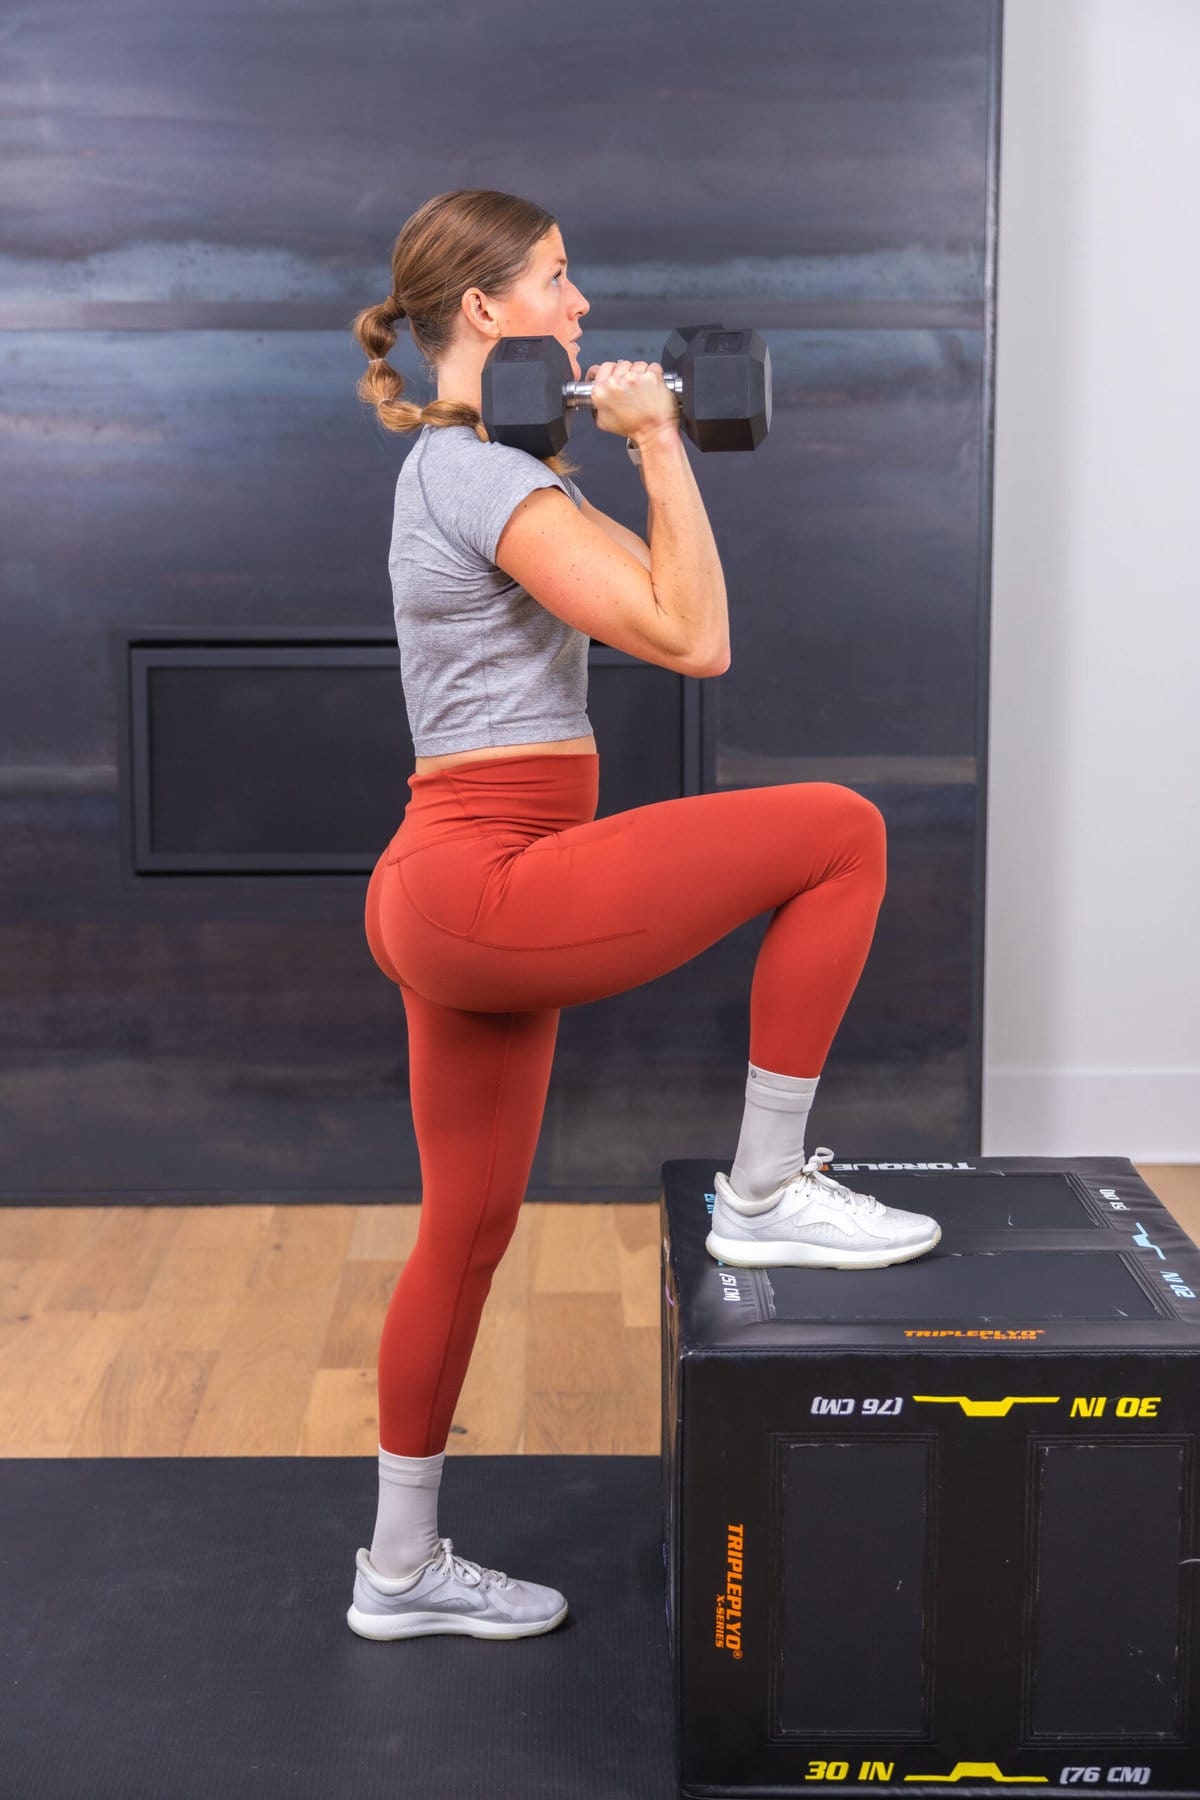 The benefits of a good glute workout